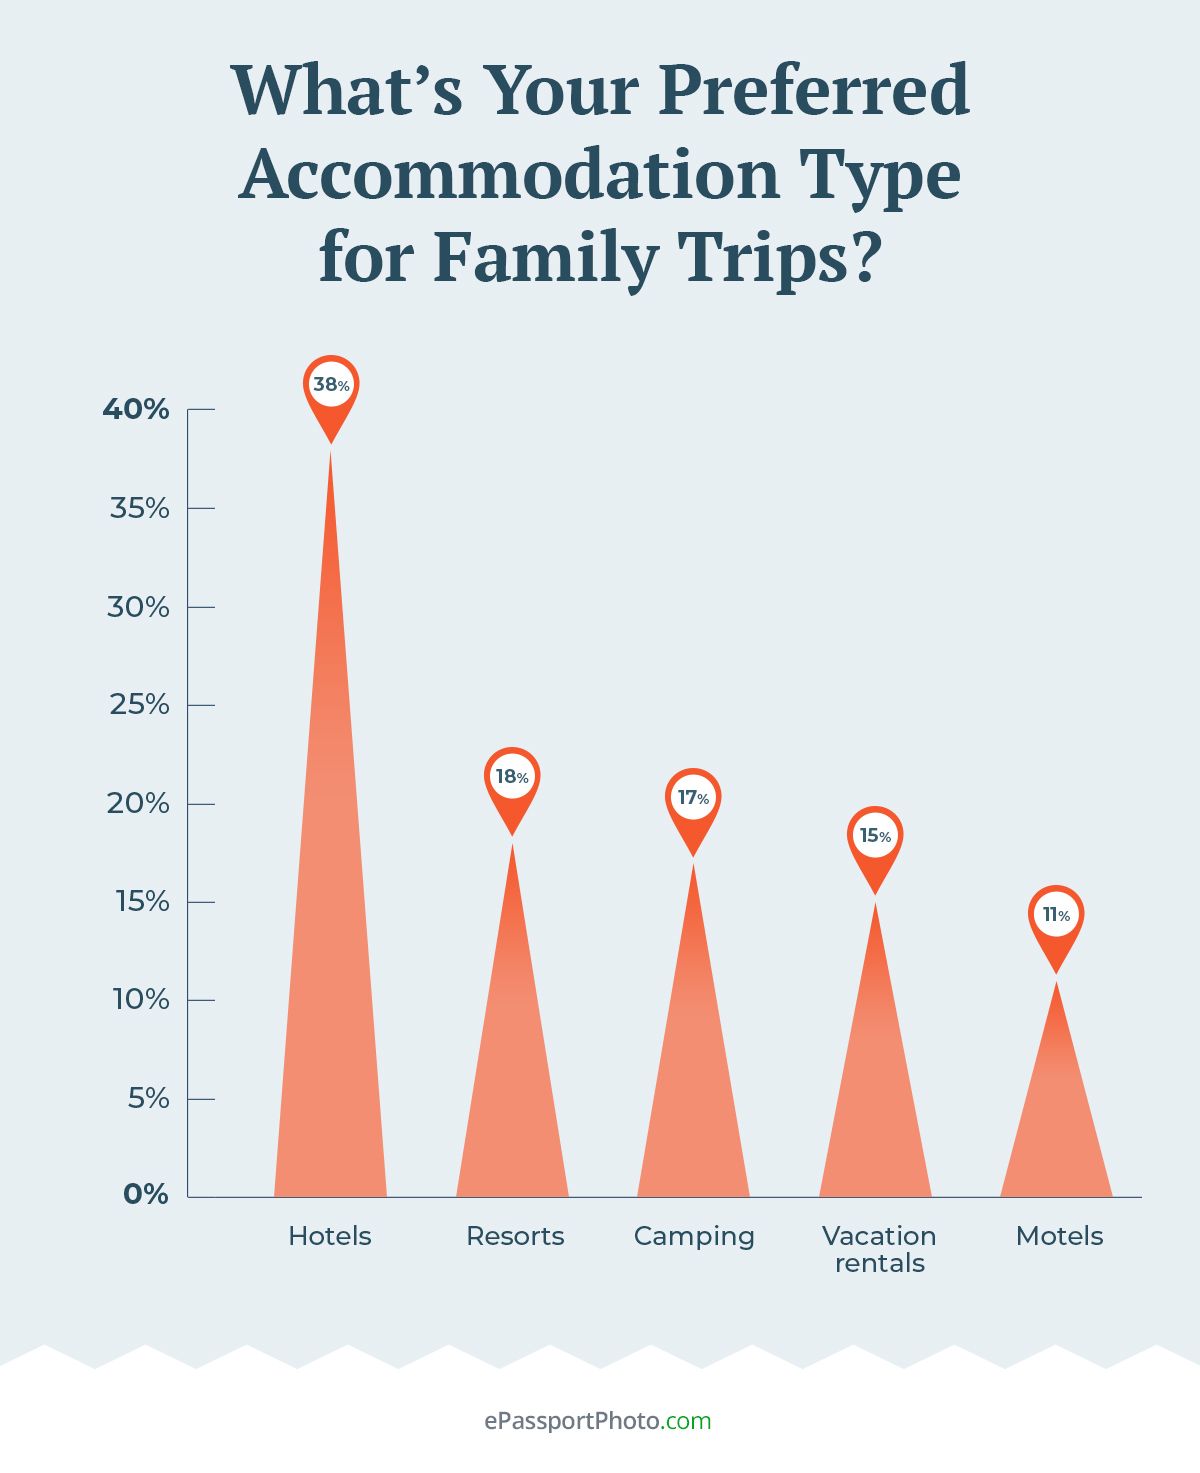 most families (38%) prefer to stay at hotels